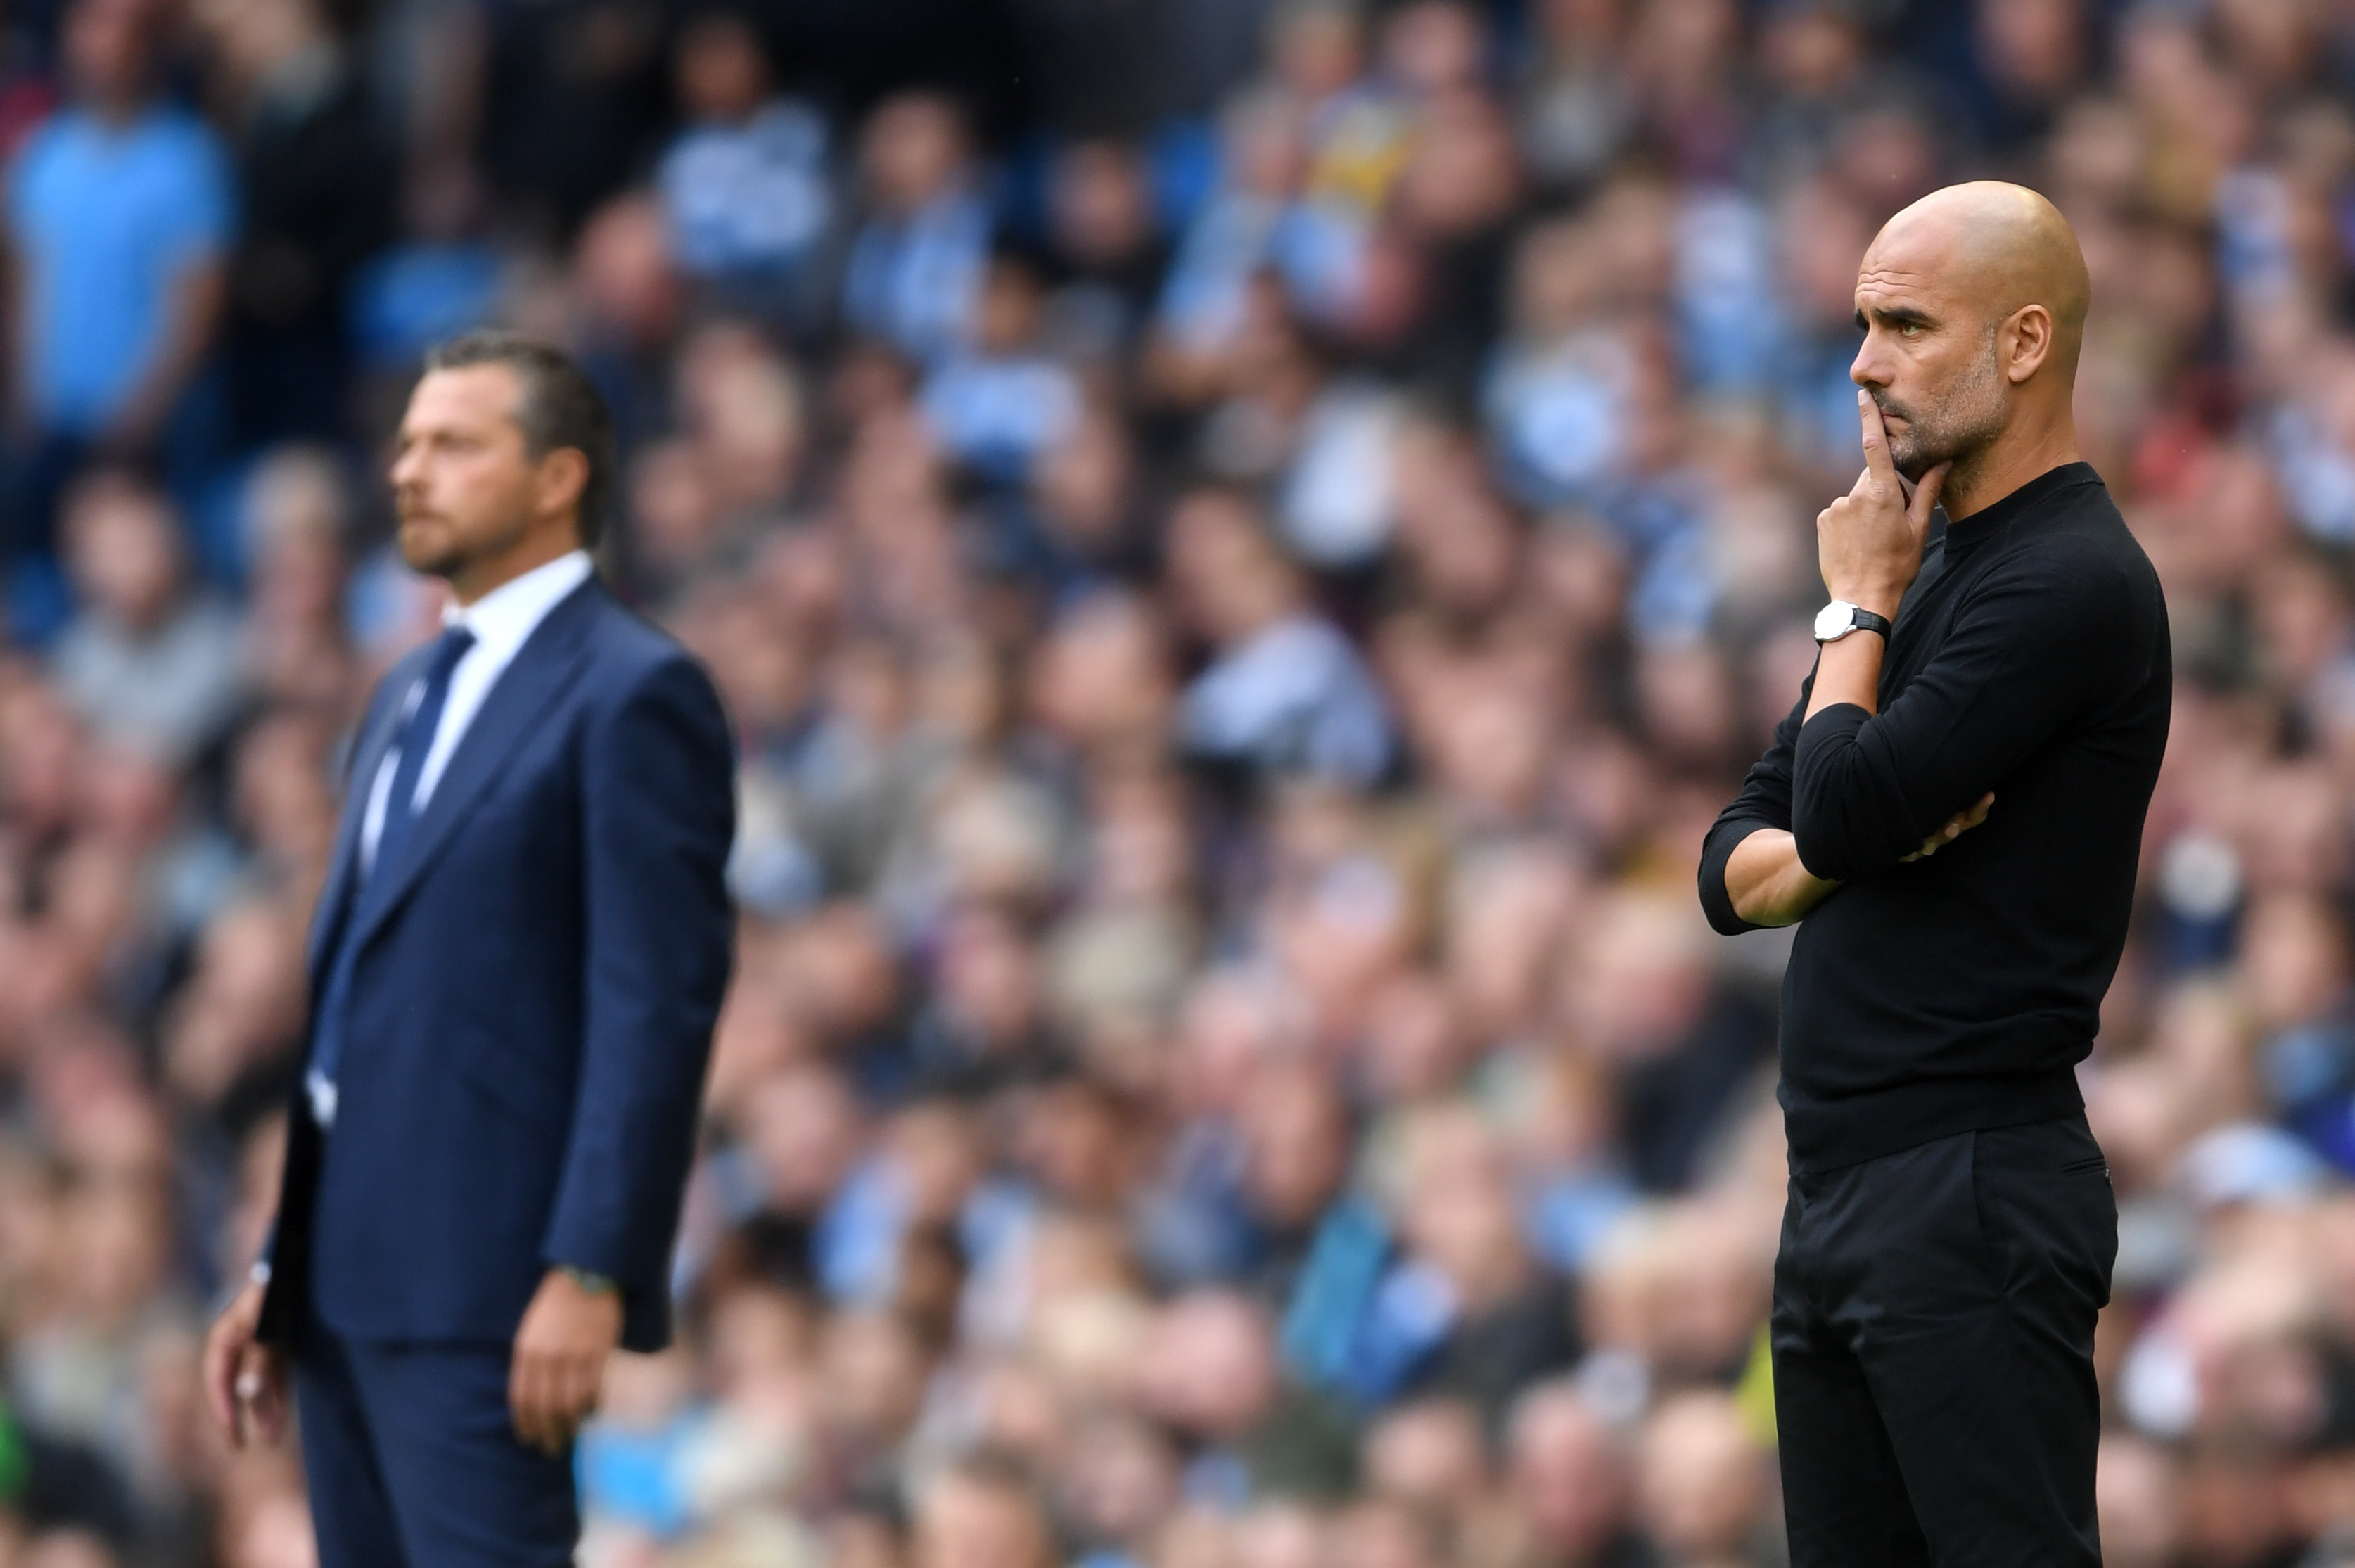 MANCHESTER, ENGLAND - SEPTEMBER 15: Josep Guardiola, Manager of Manchester City looks on during the Premier League match between Manchester City and Fulham FC at Etihad Stadium on September 15, 2018 in Manchester, United Kingdom.  (Photo by Laurence Griffiths/Getty Images)